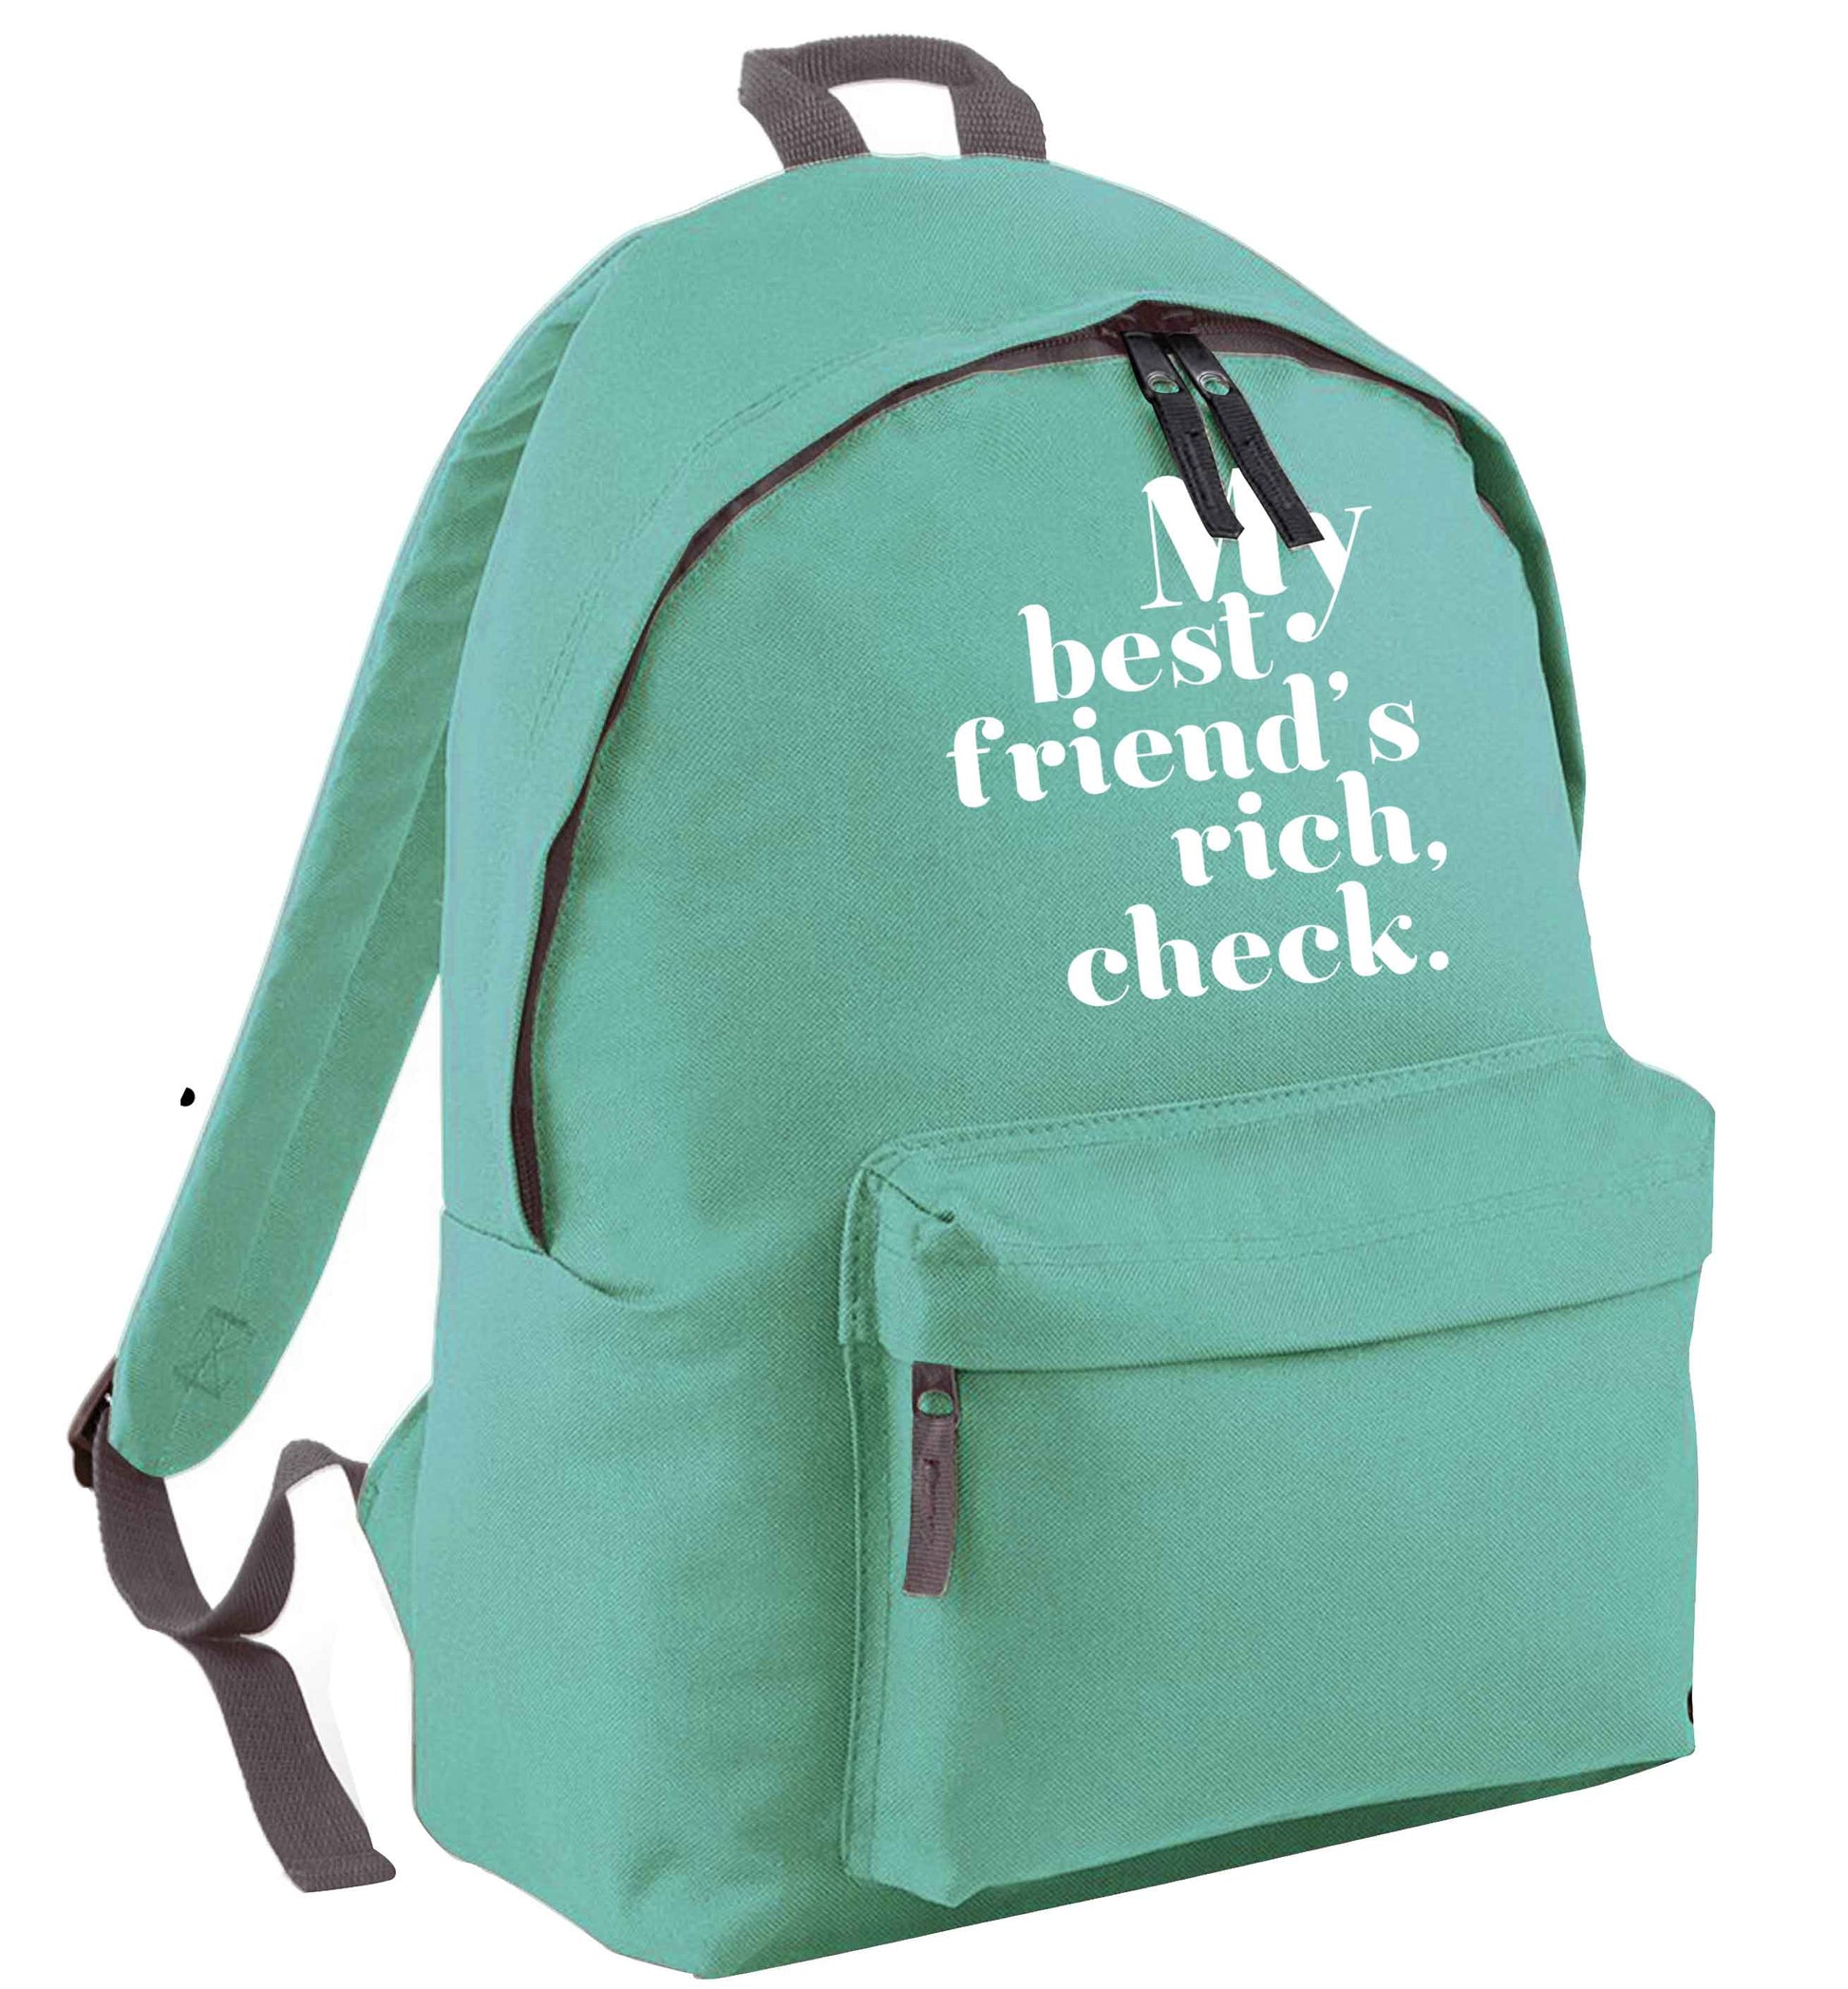 Got a rich best friend? Why not ask them to get you this, just let us  know and we'll tripple the price ;)  mint adults backpack